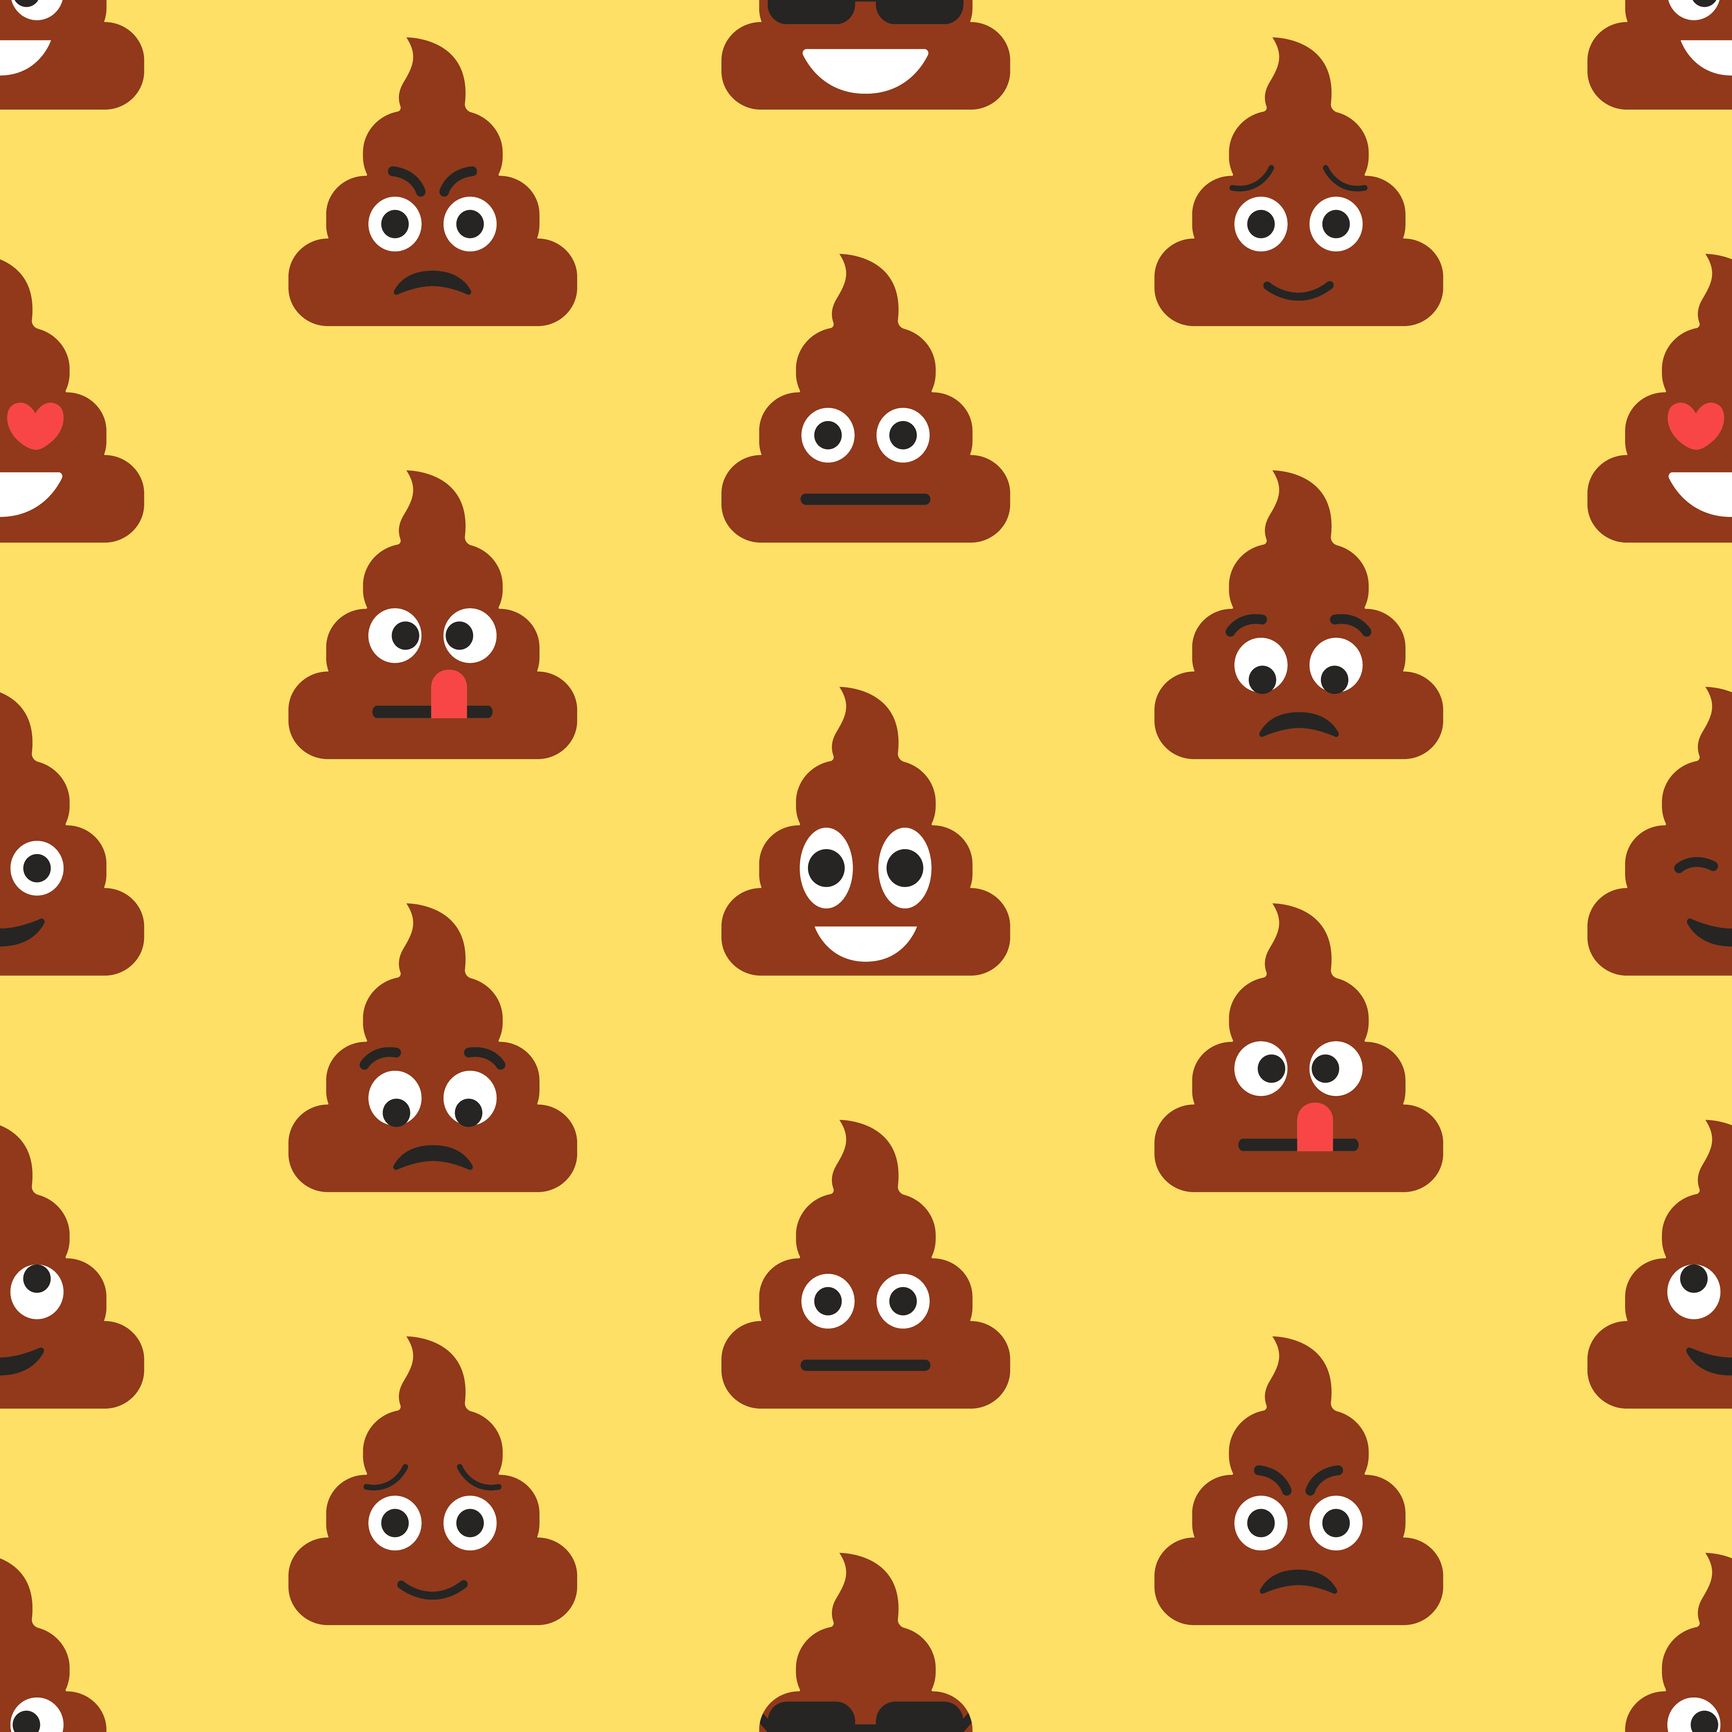 Side Effects of Holding in Poop: What You Should Know